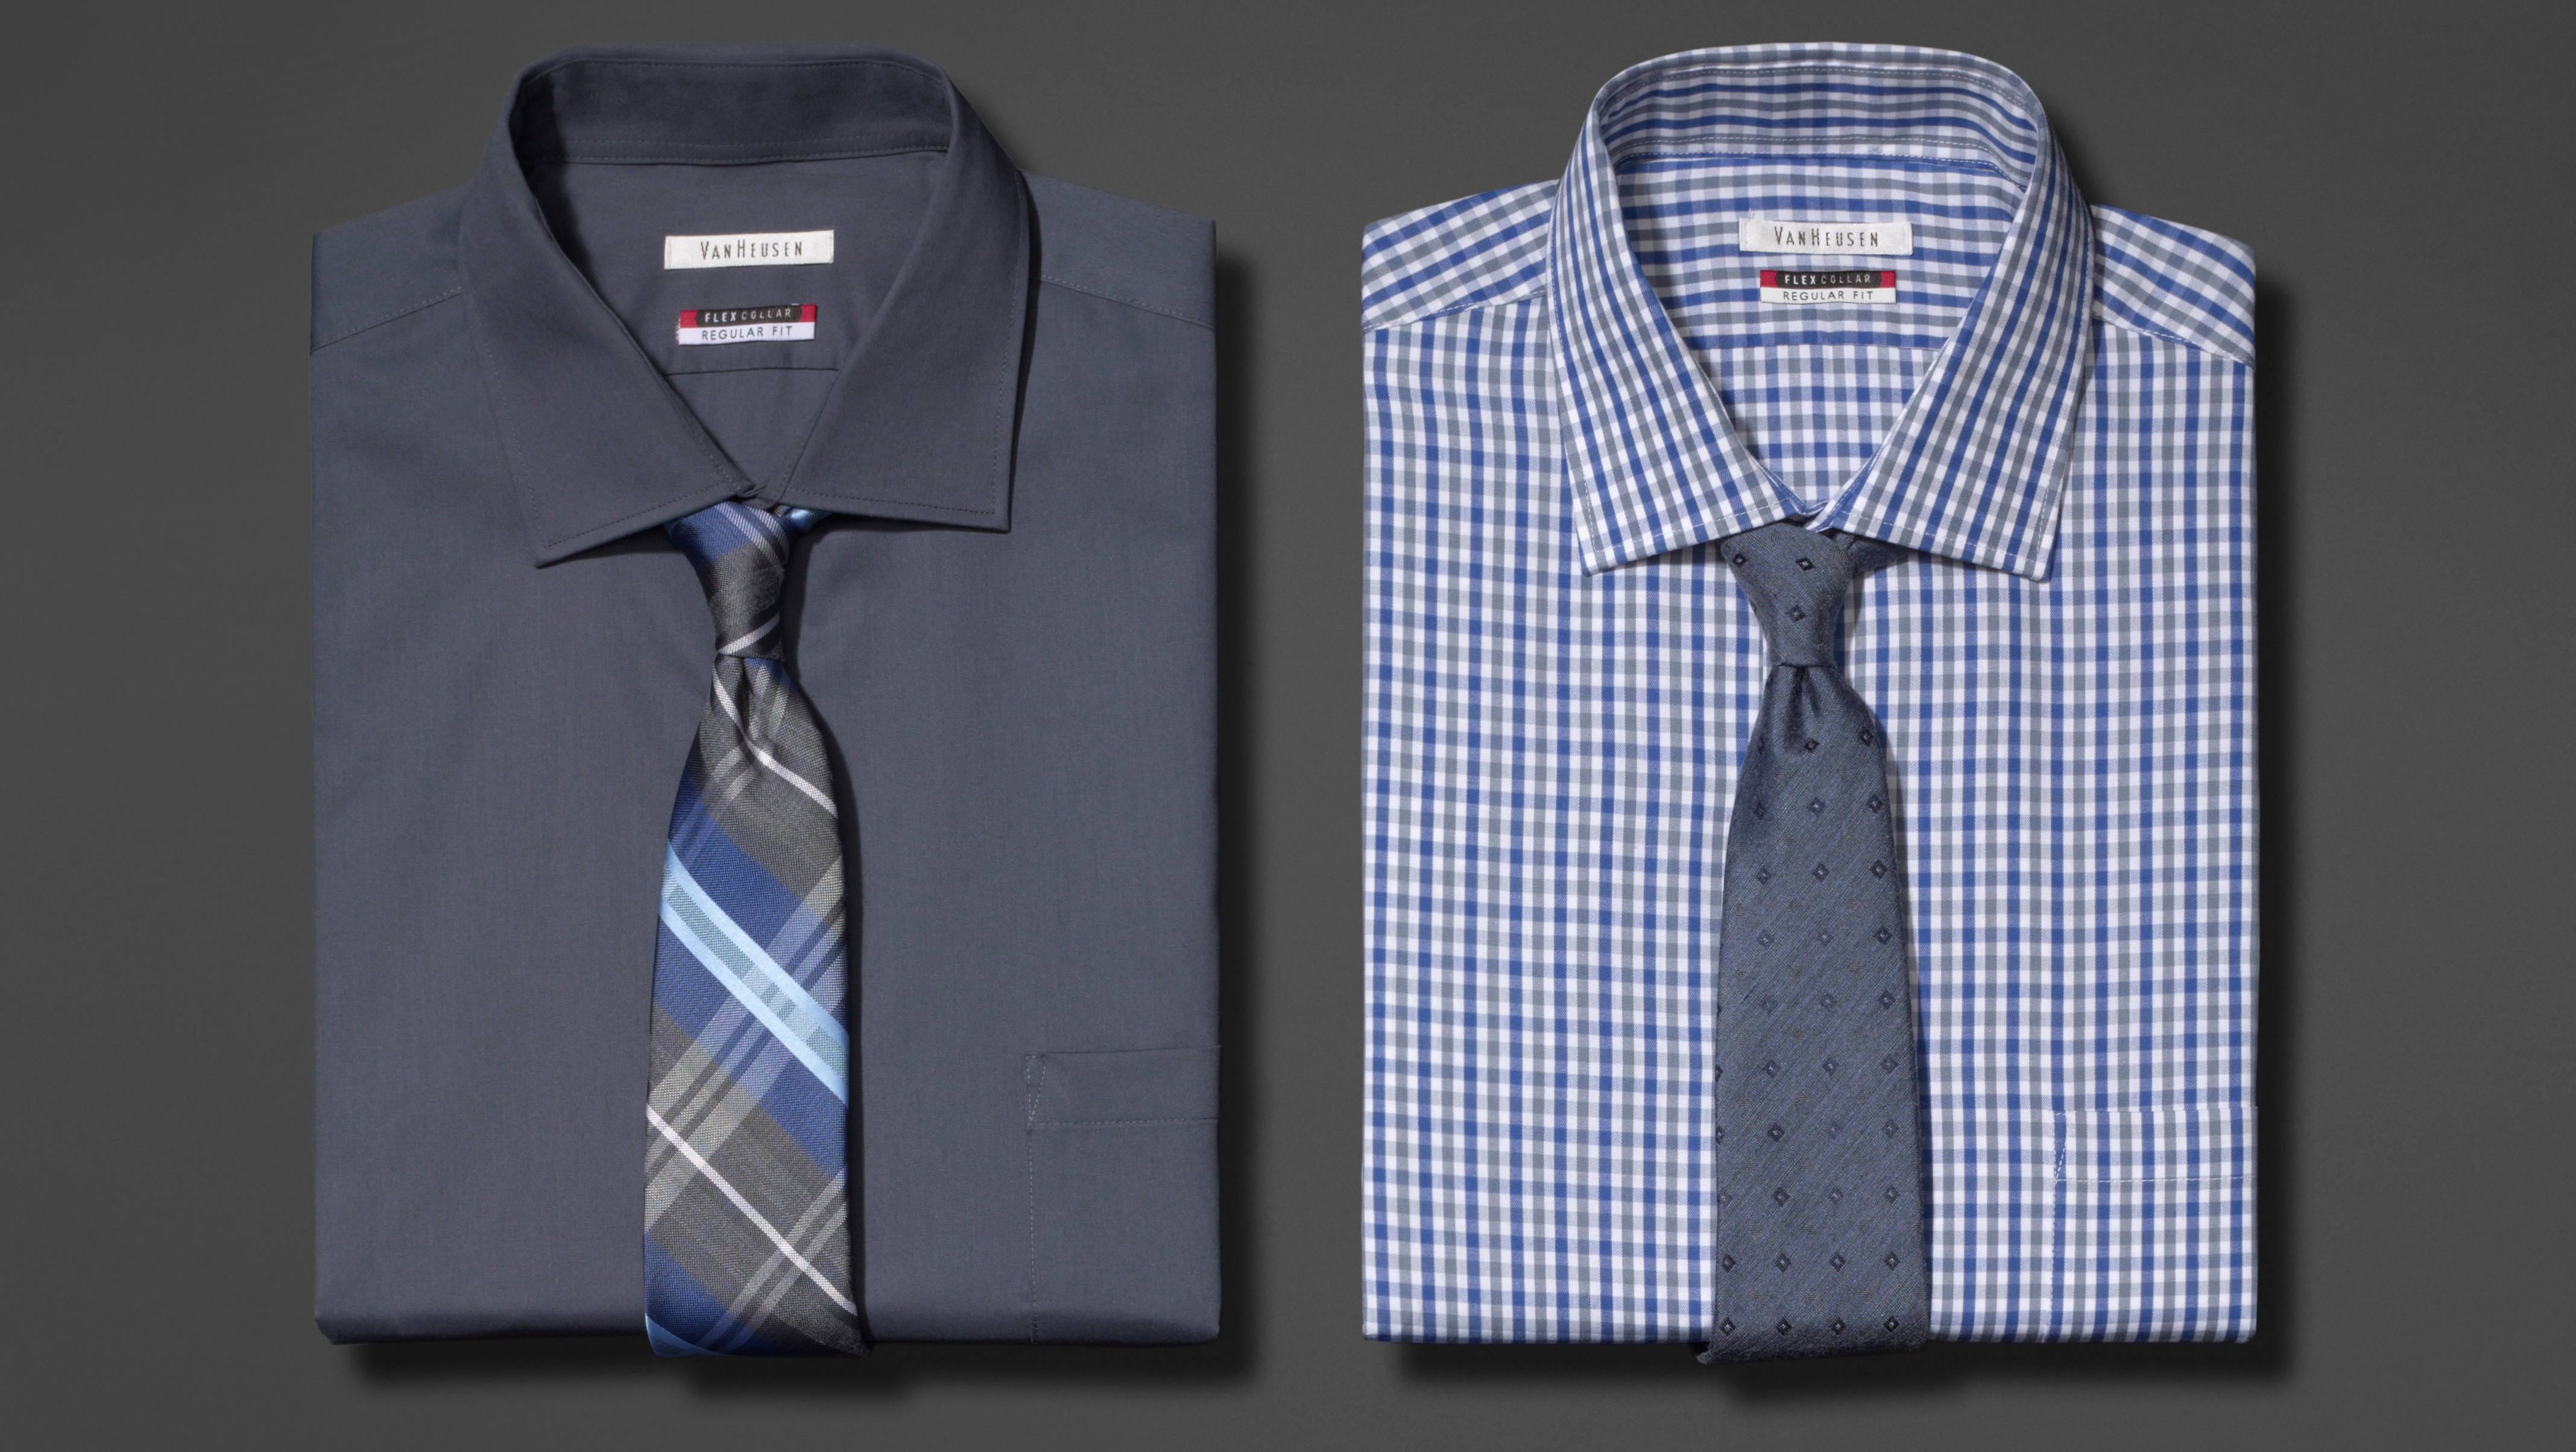 PVH LAUNCHES THE ULTIMATE DRESS SHIRT - MR Magazine